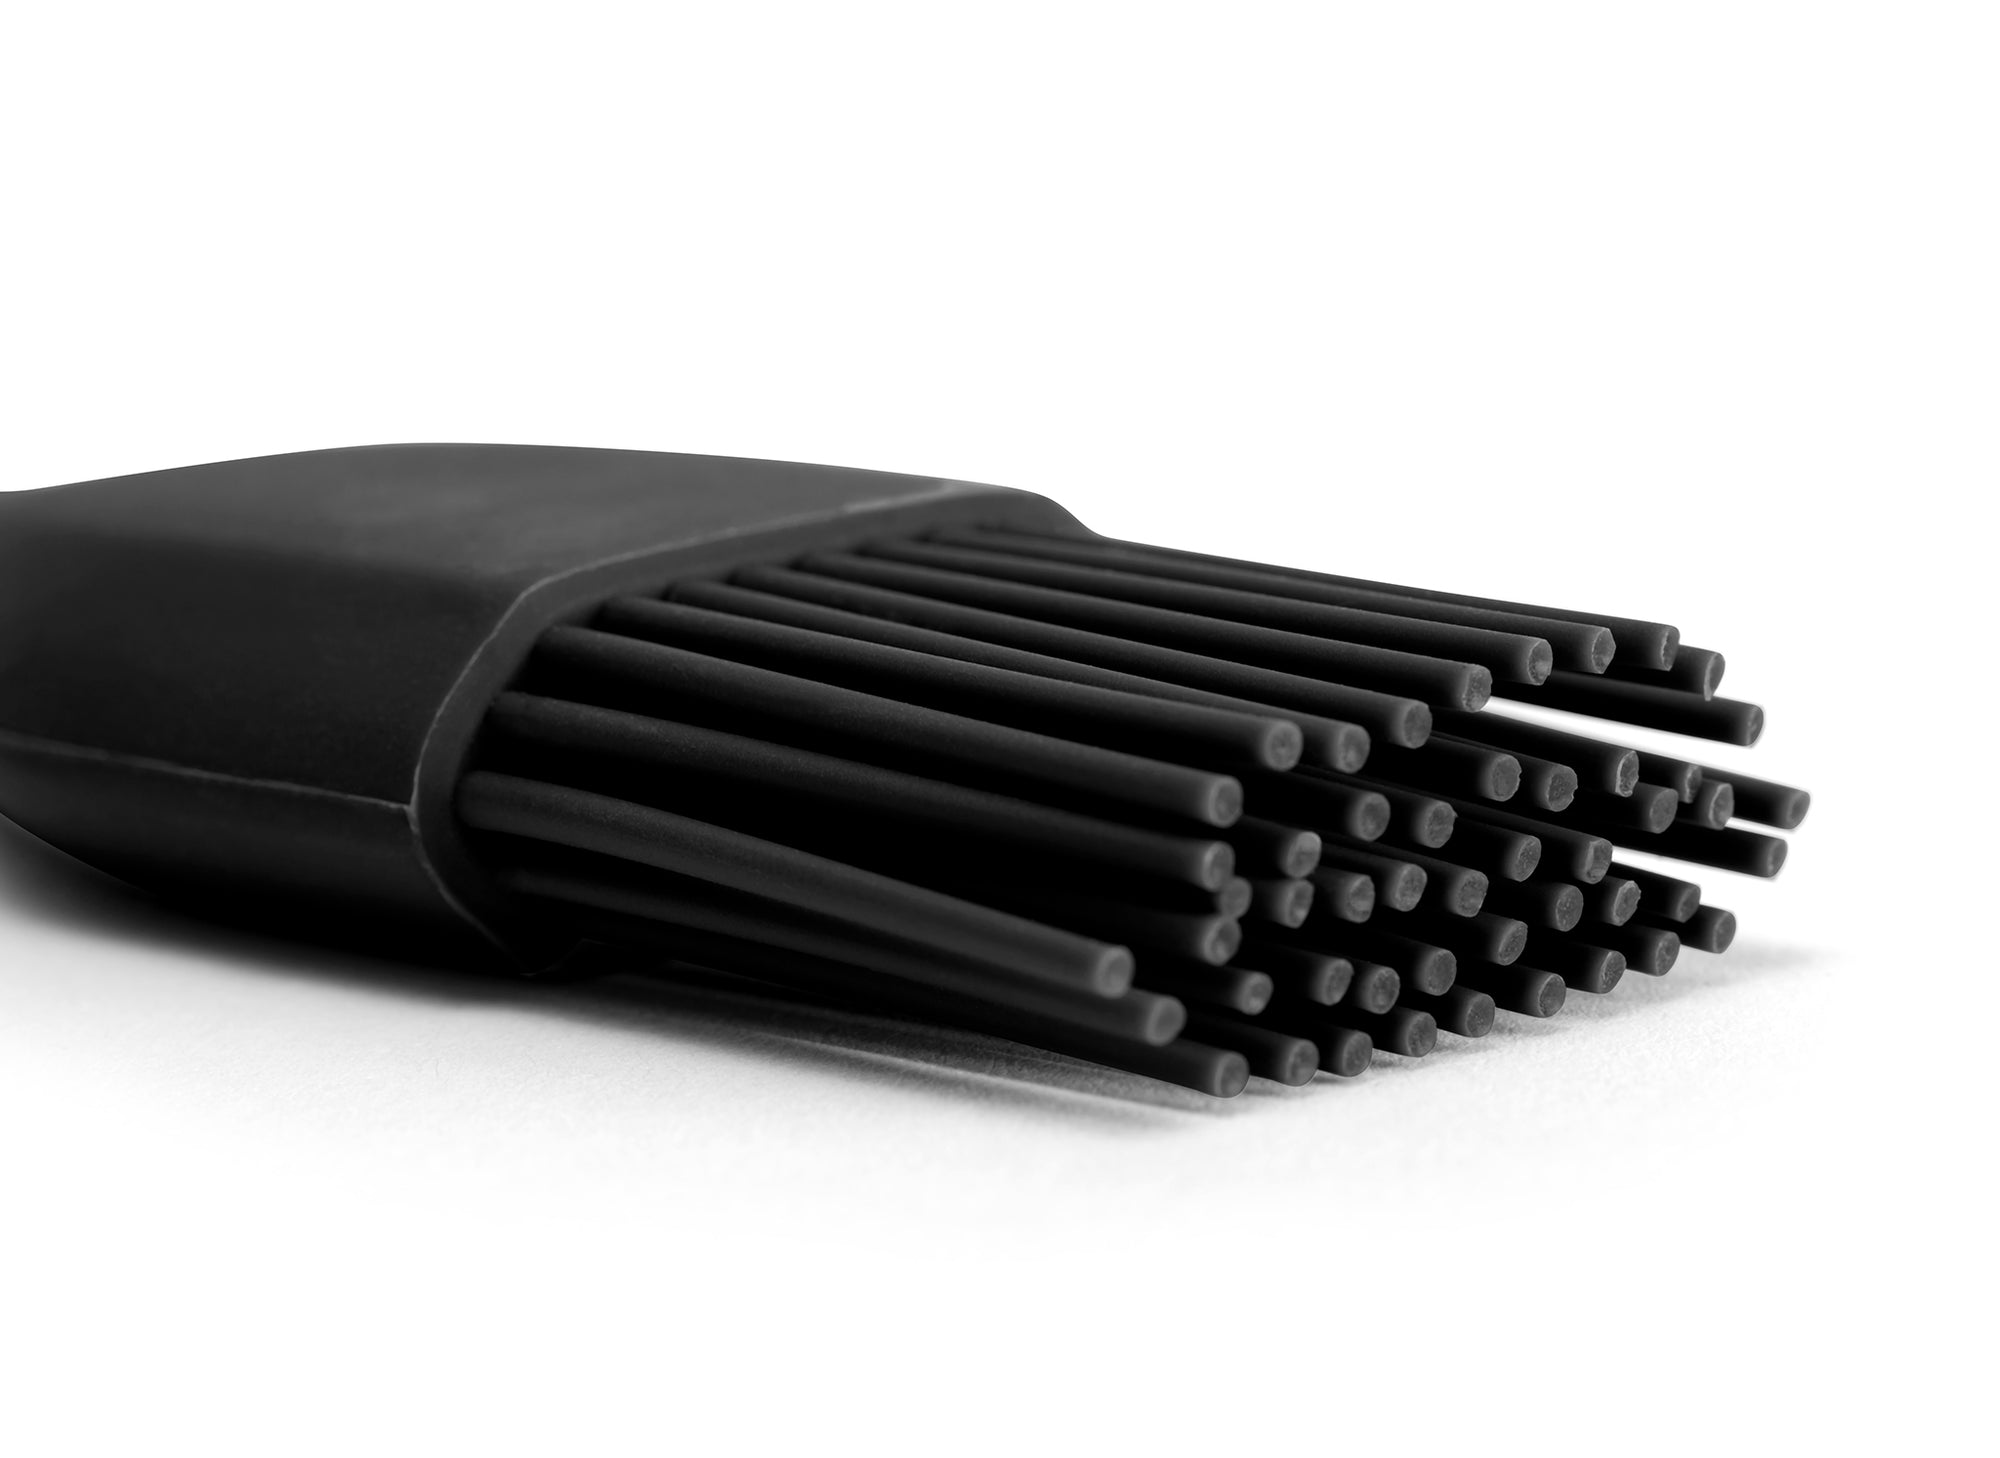 Close view of the silicone bristles on a Black Misen Pastry Brush.